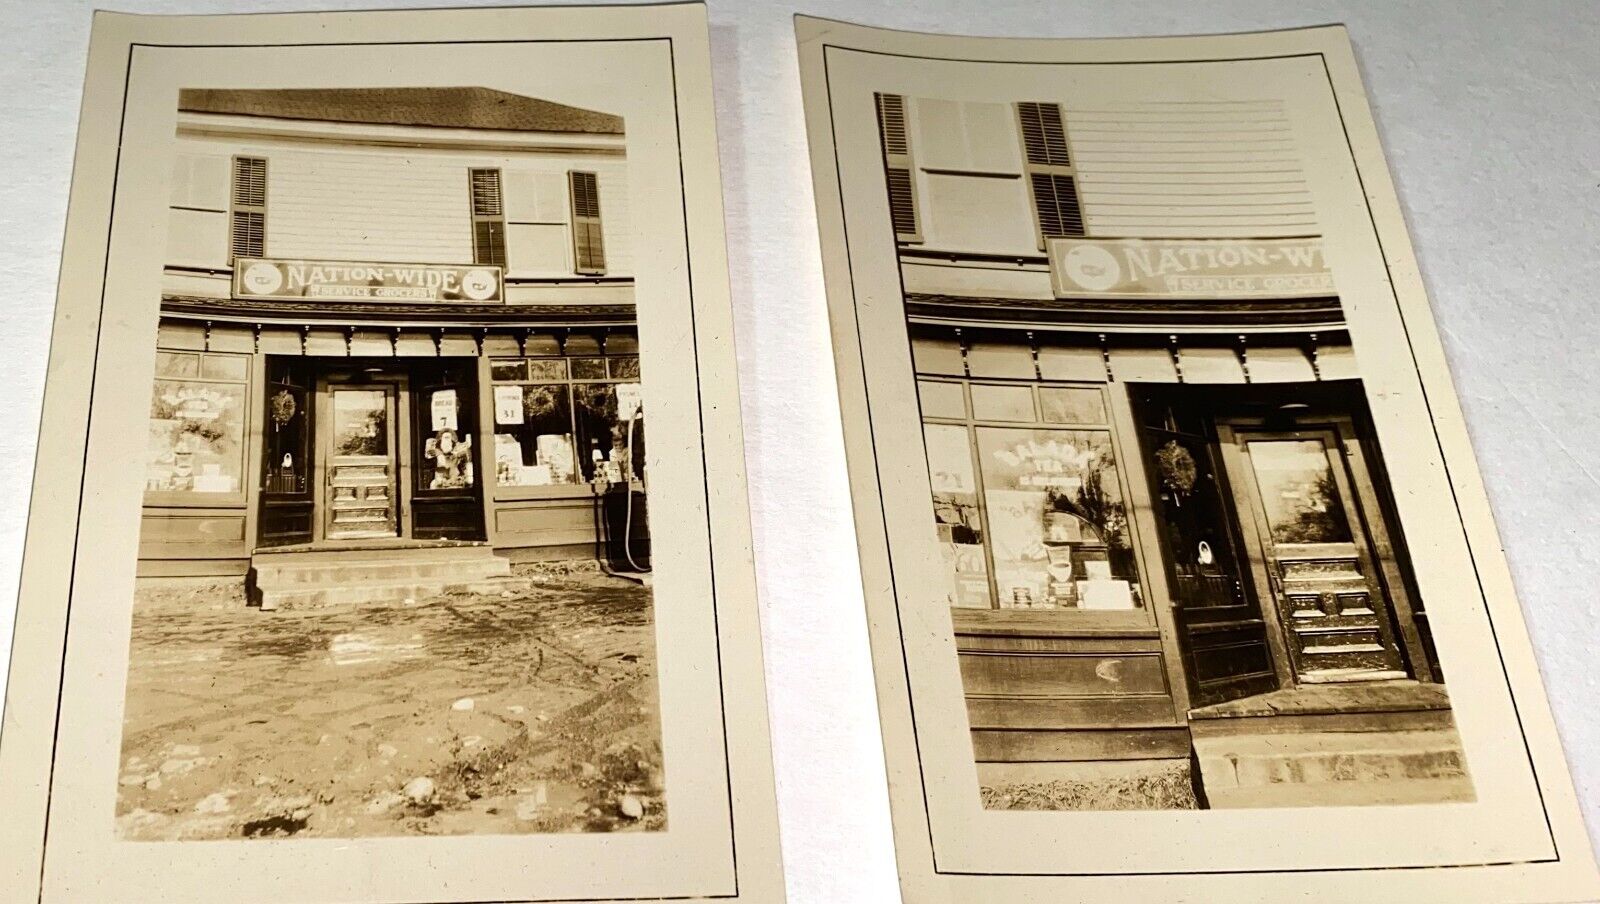 Rare Antique American Nation Wide Grocers Storefront Snapshot Photo Lot C.1910s